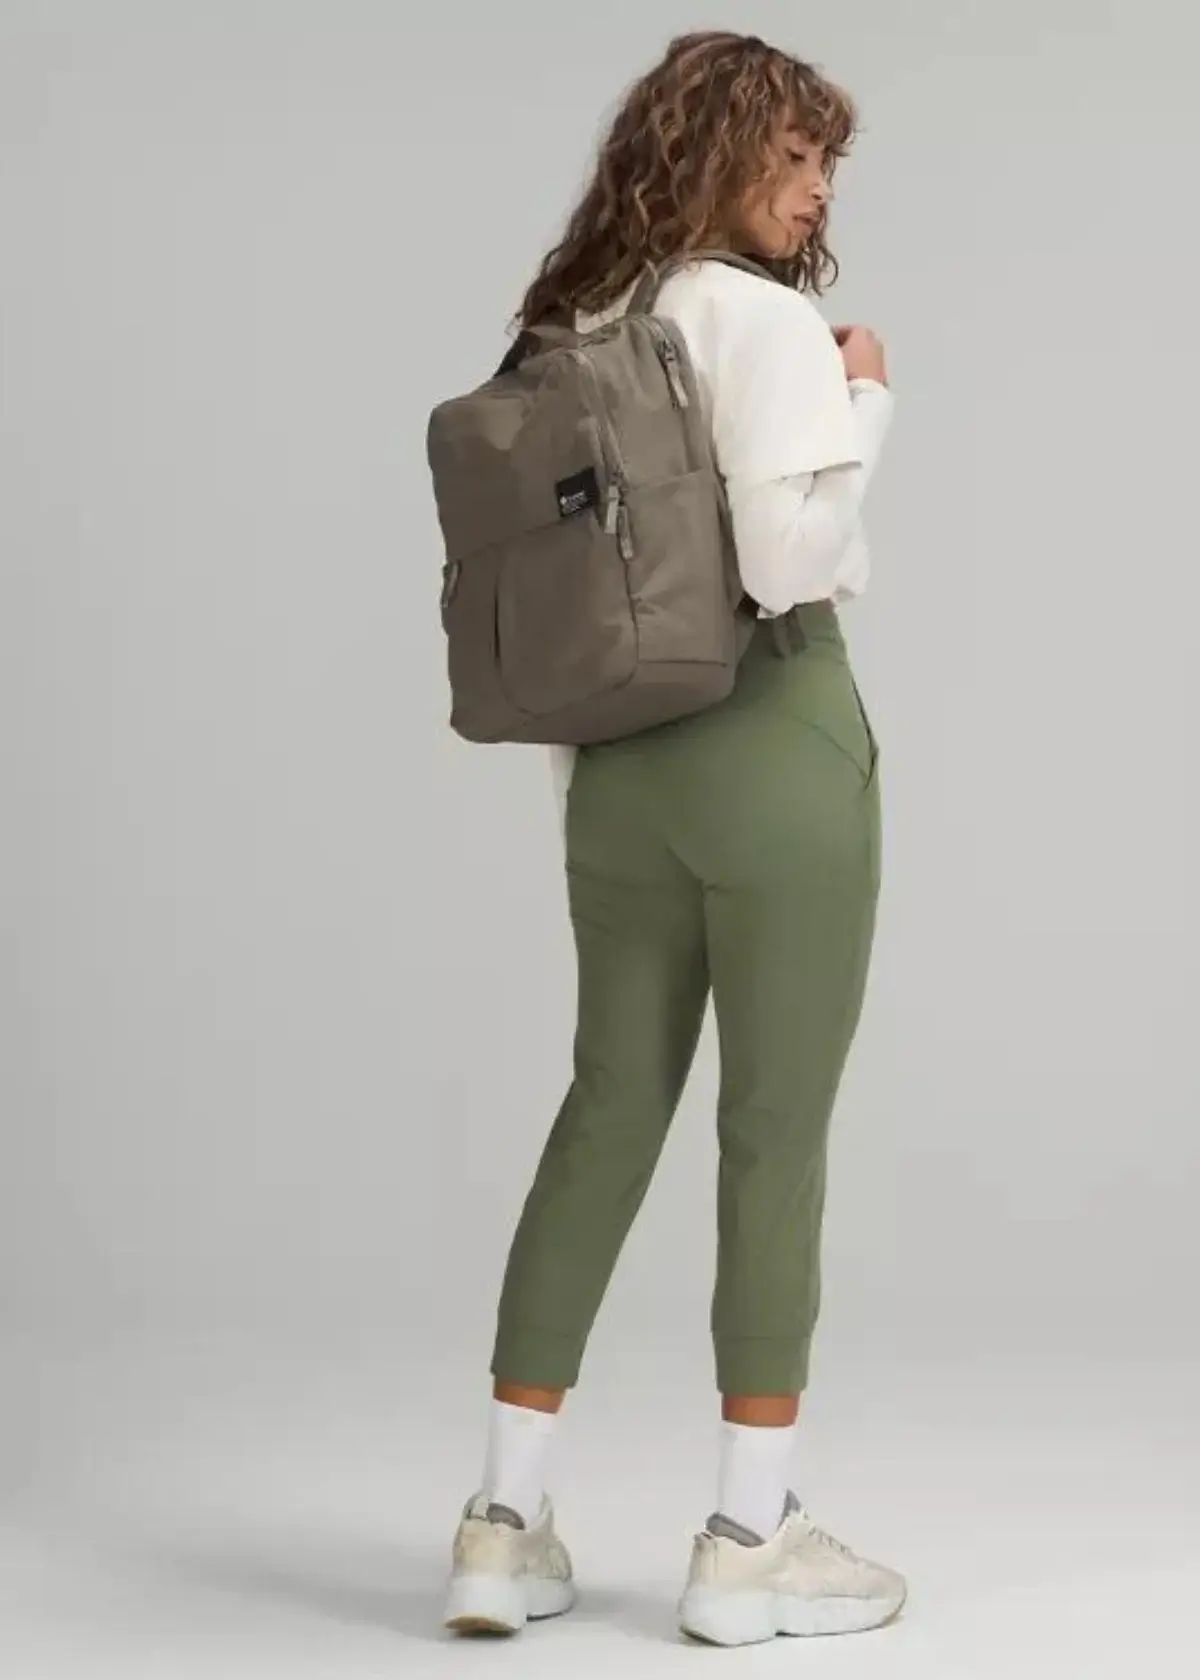 How to choose the right Lululemon backpack?